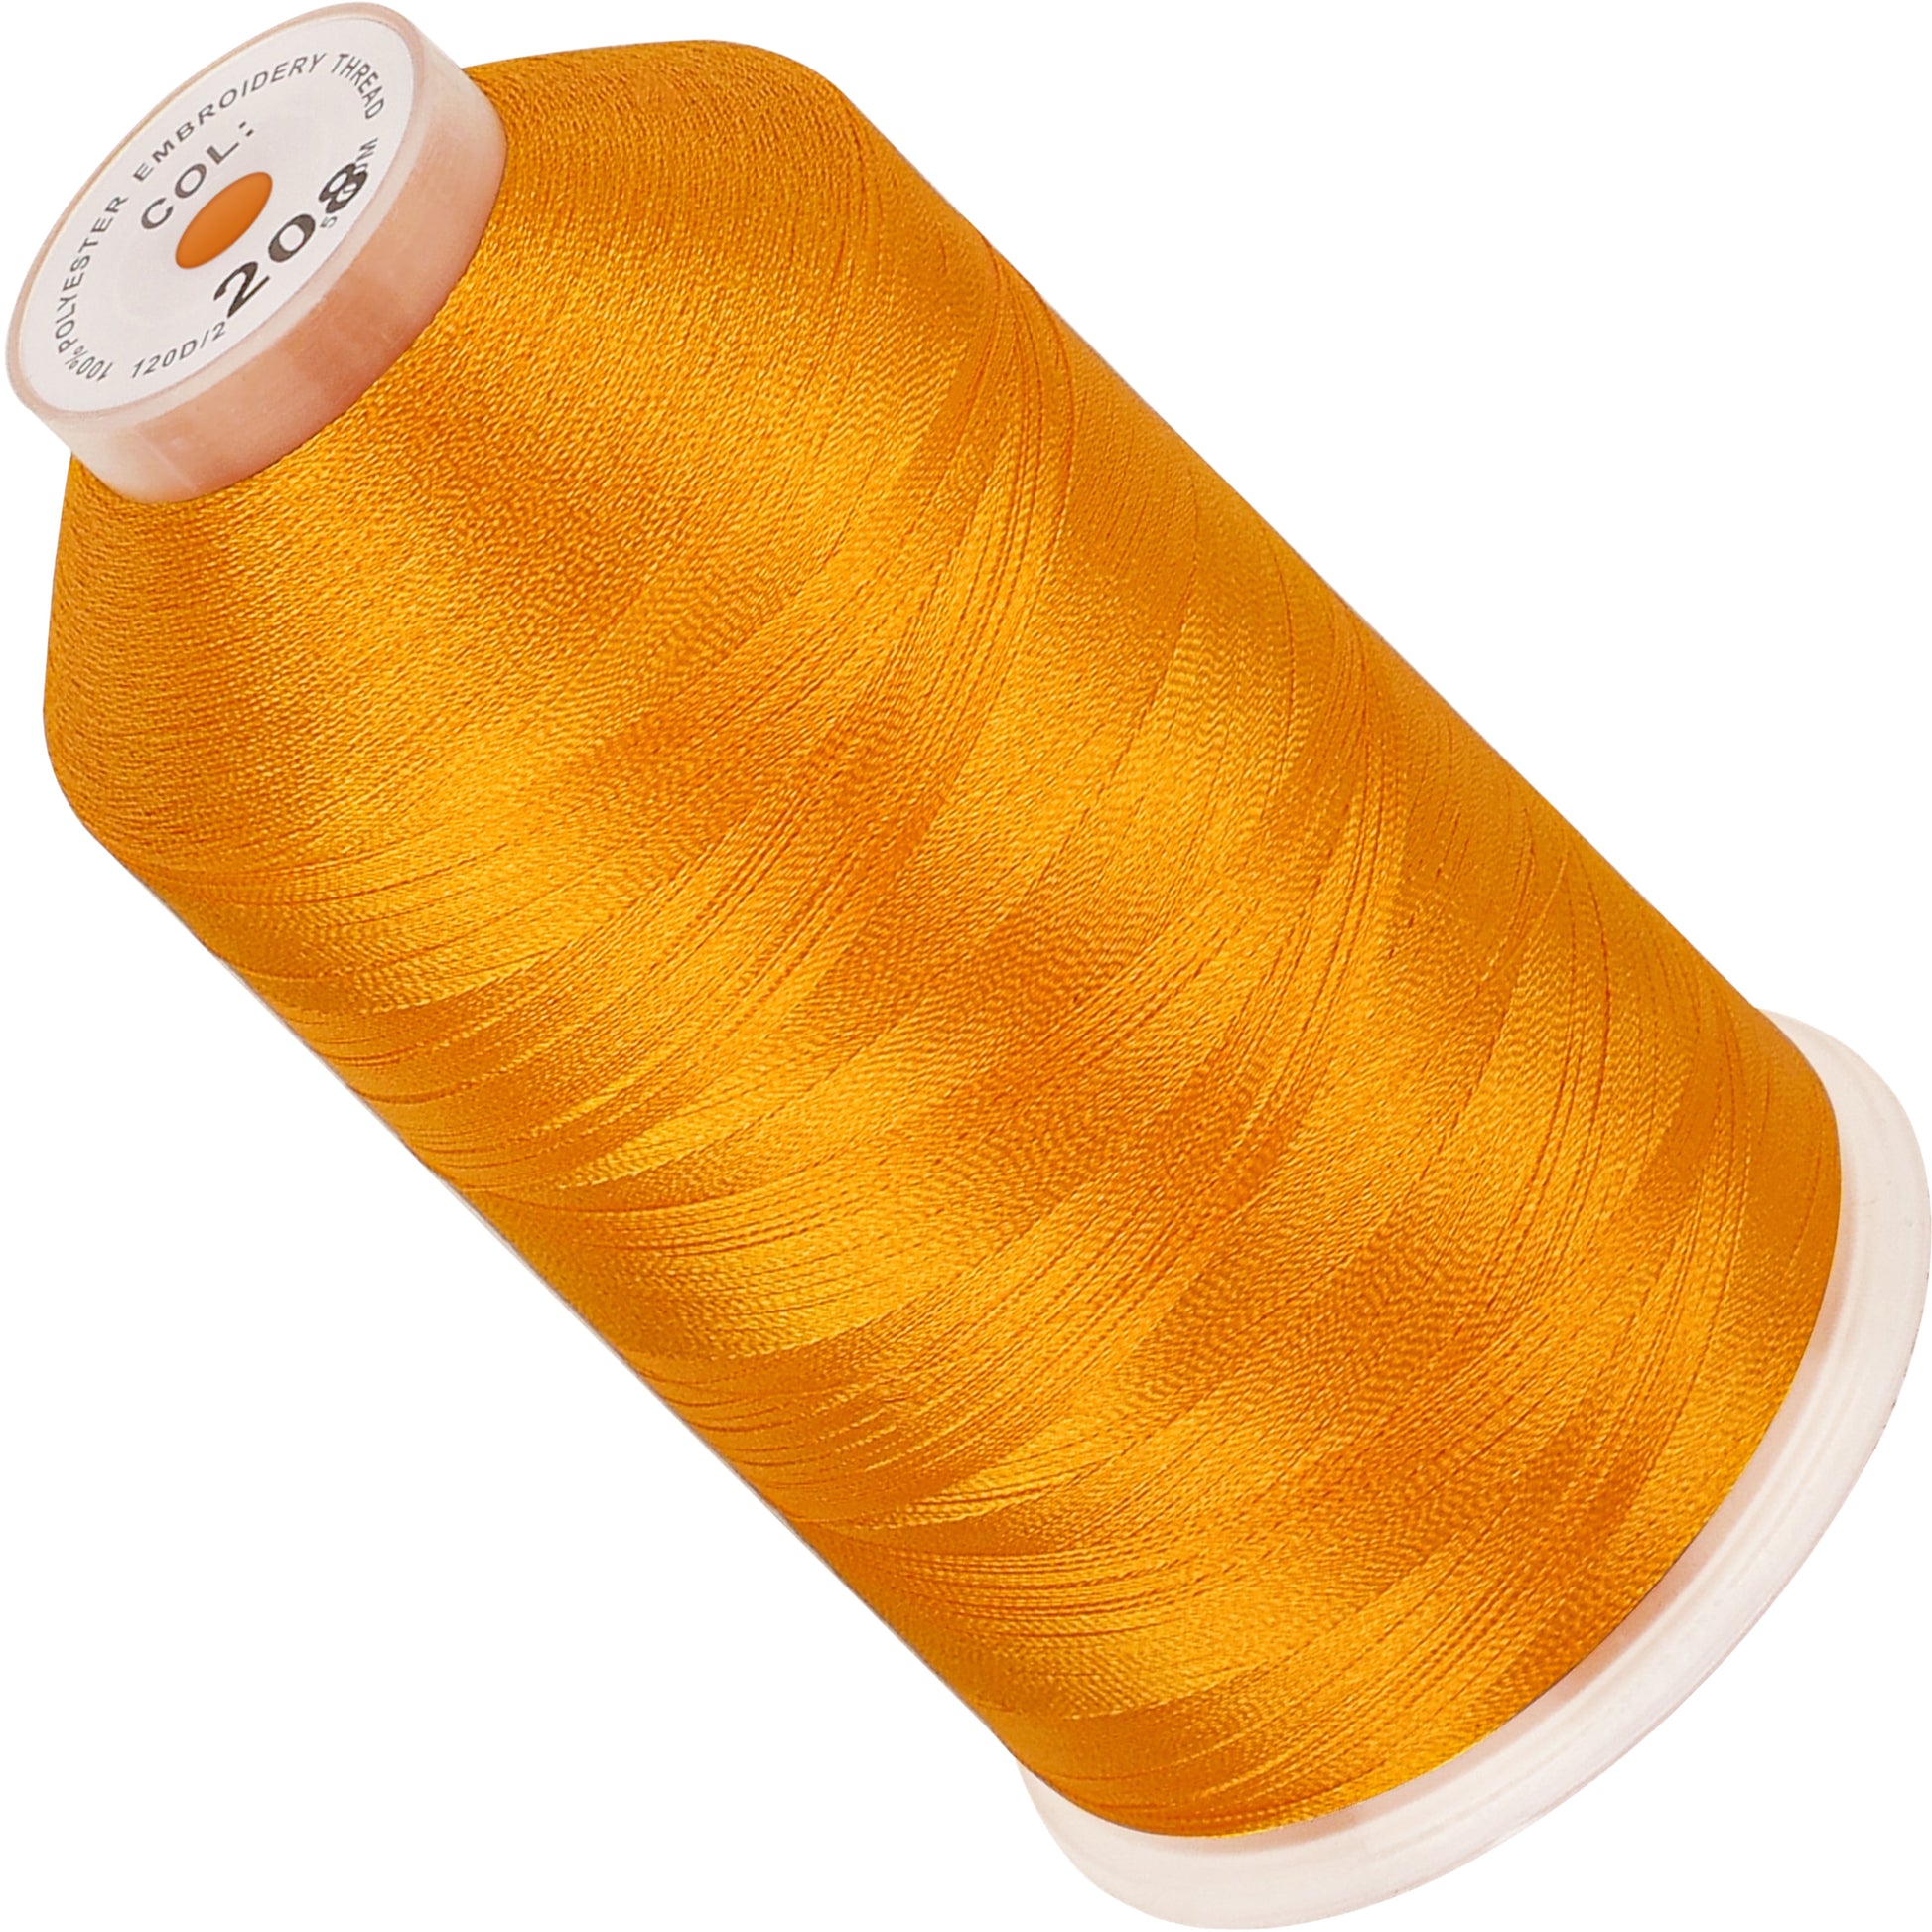  New brothread - 30 Options - 4 Large Cones of 5500Y (5000M)  Each All Purpose Spun Polyester Serger Thread 40S/2 (Tex27) - Variegated  Colors